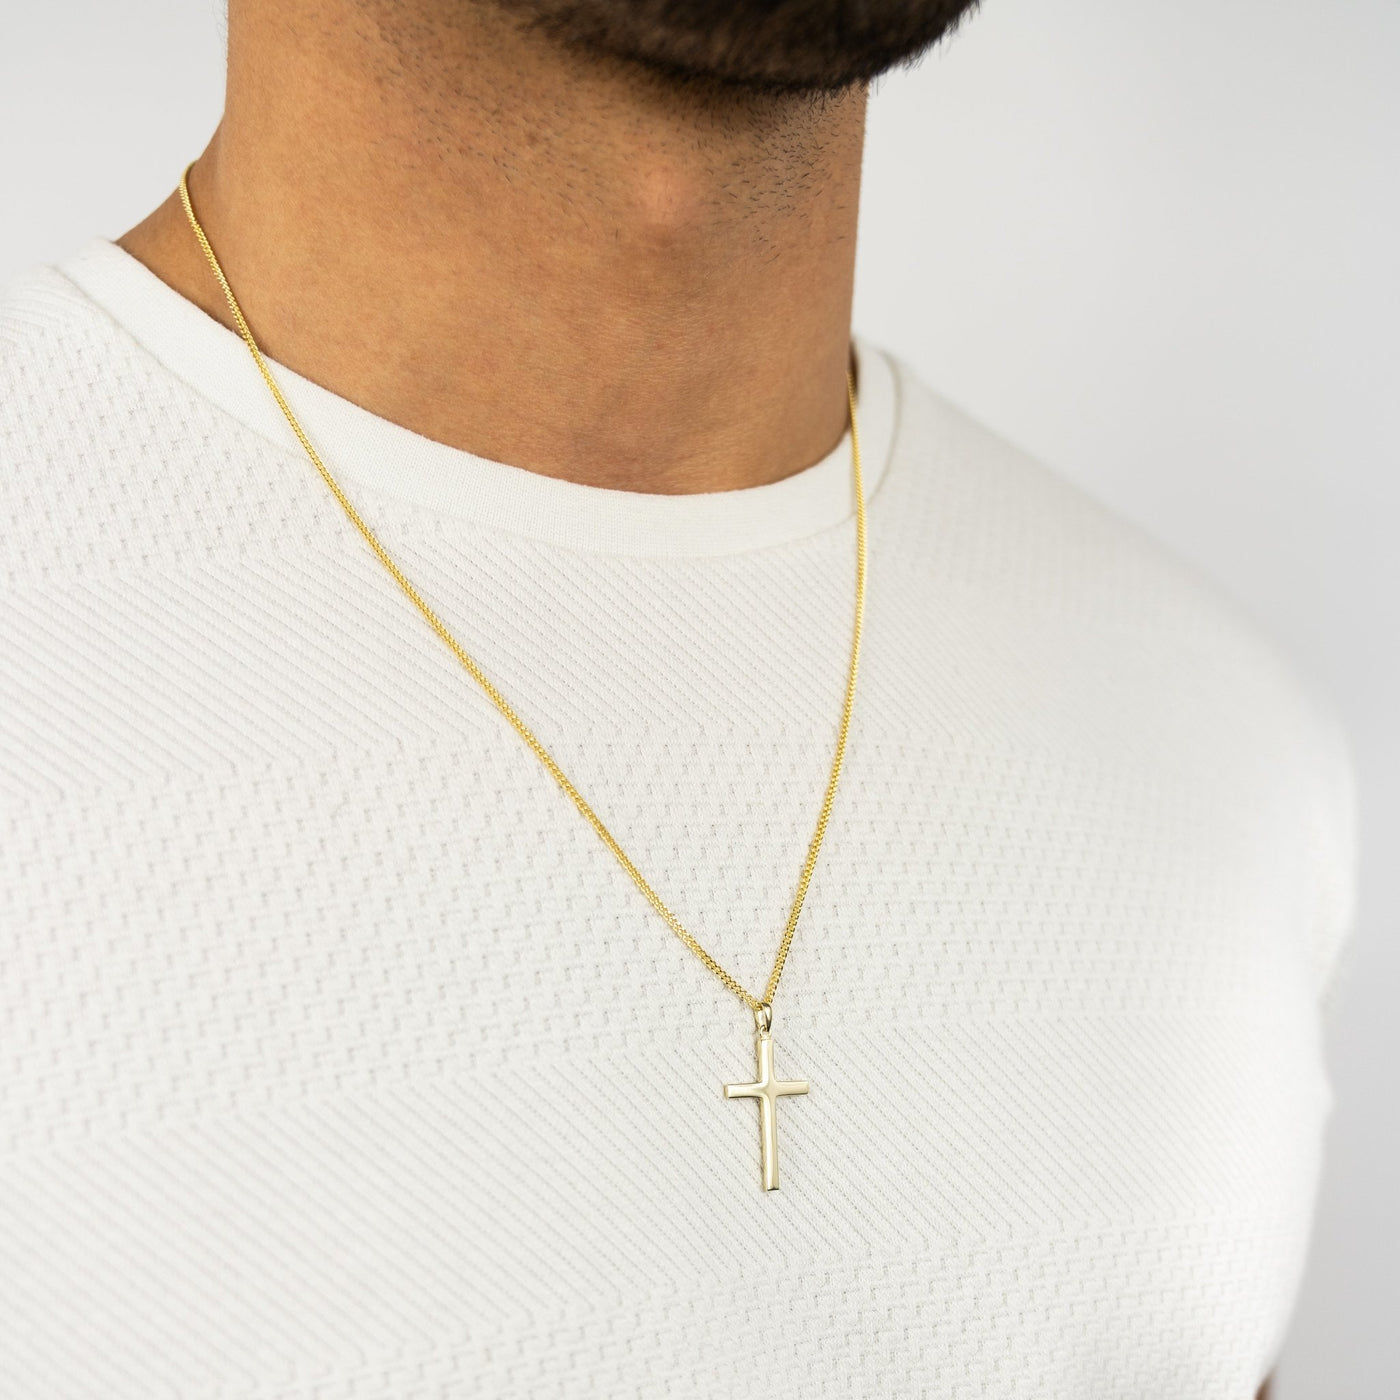 CROSS SOLID NECKLACE 333 GOLD - IDENTIM®